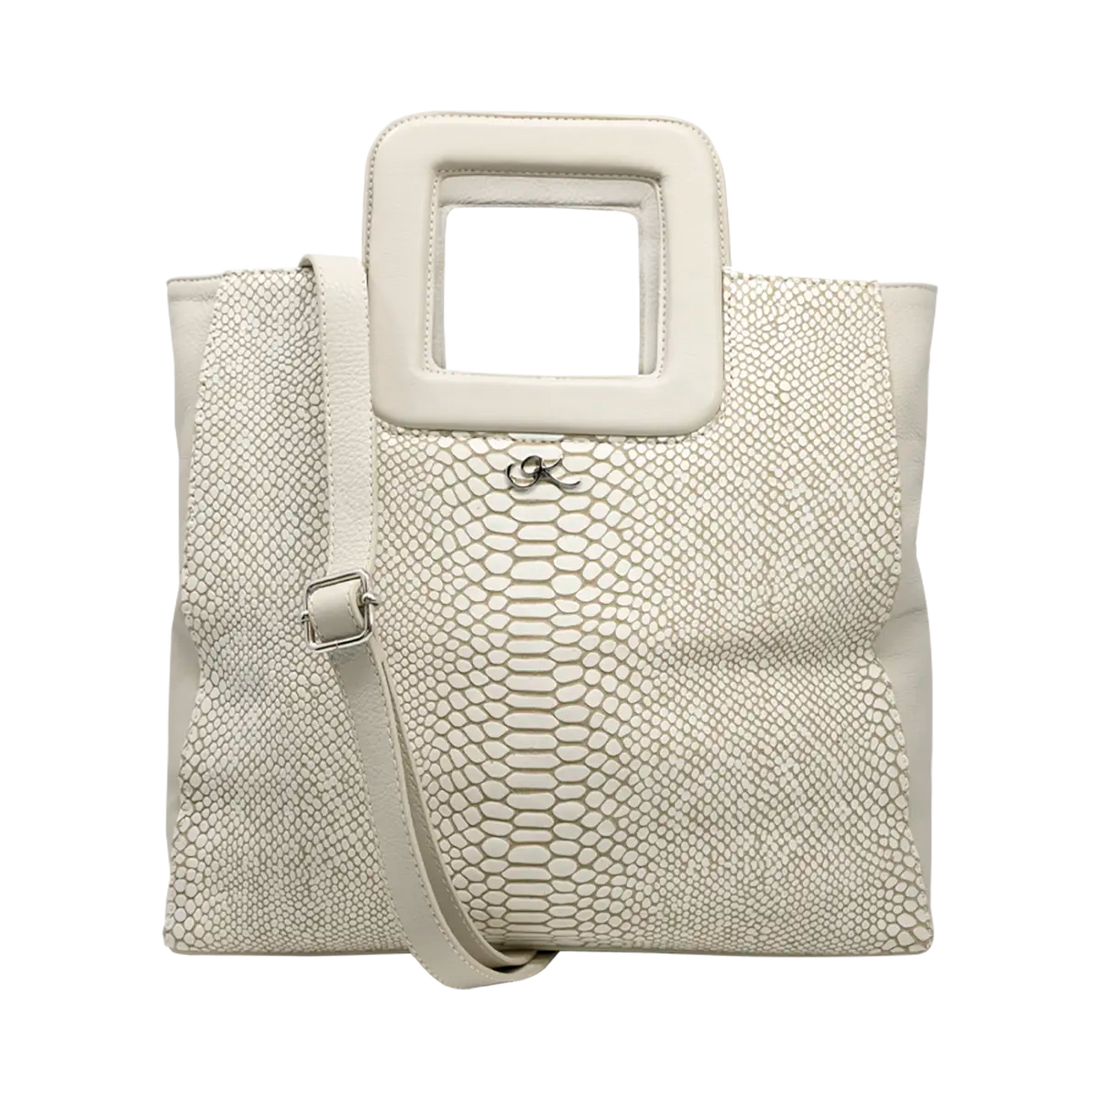 large ivory print ltd leather print handbag with a square handle. Accessory for women in San Diego, CA.